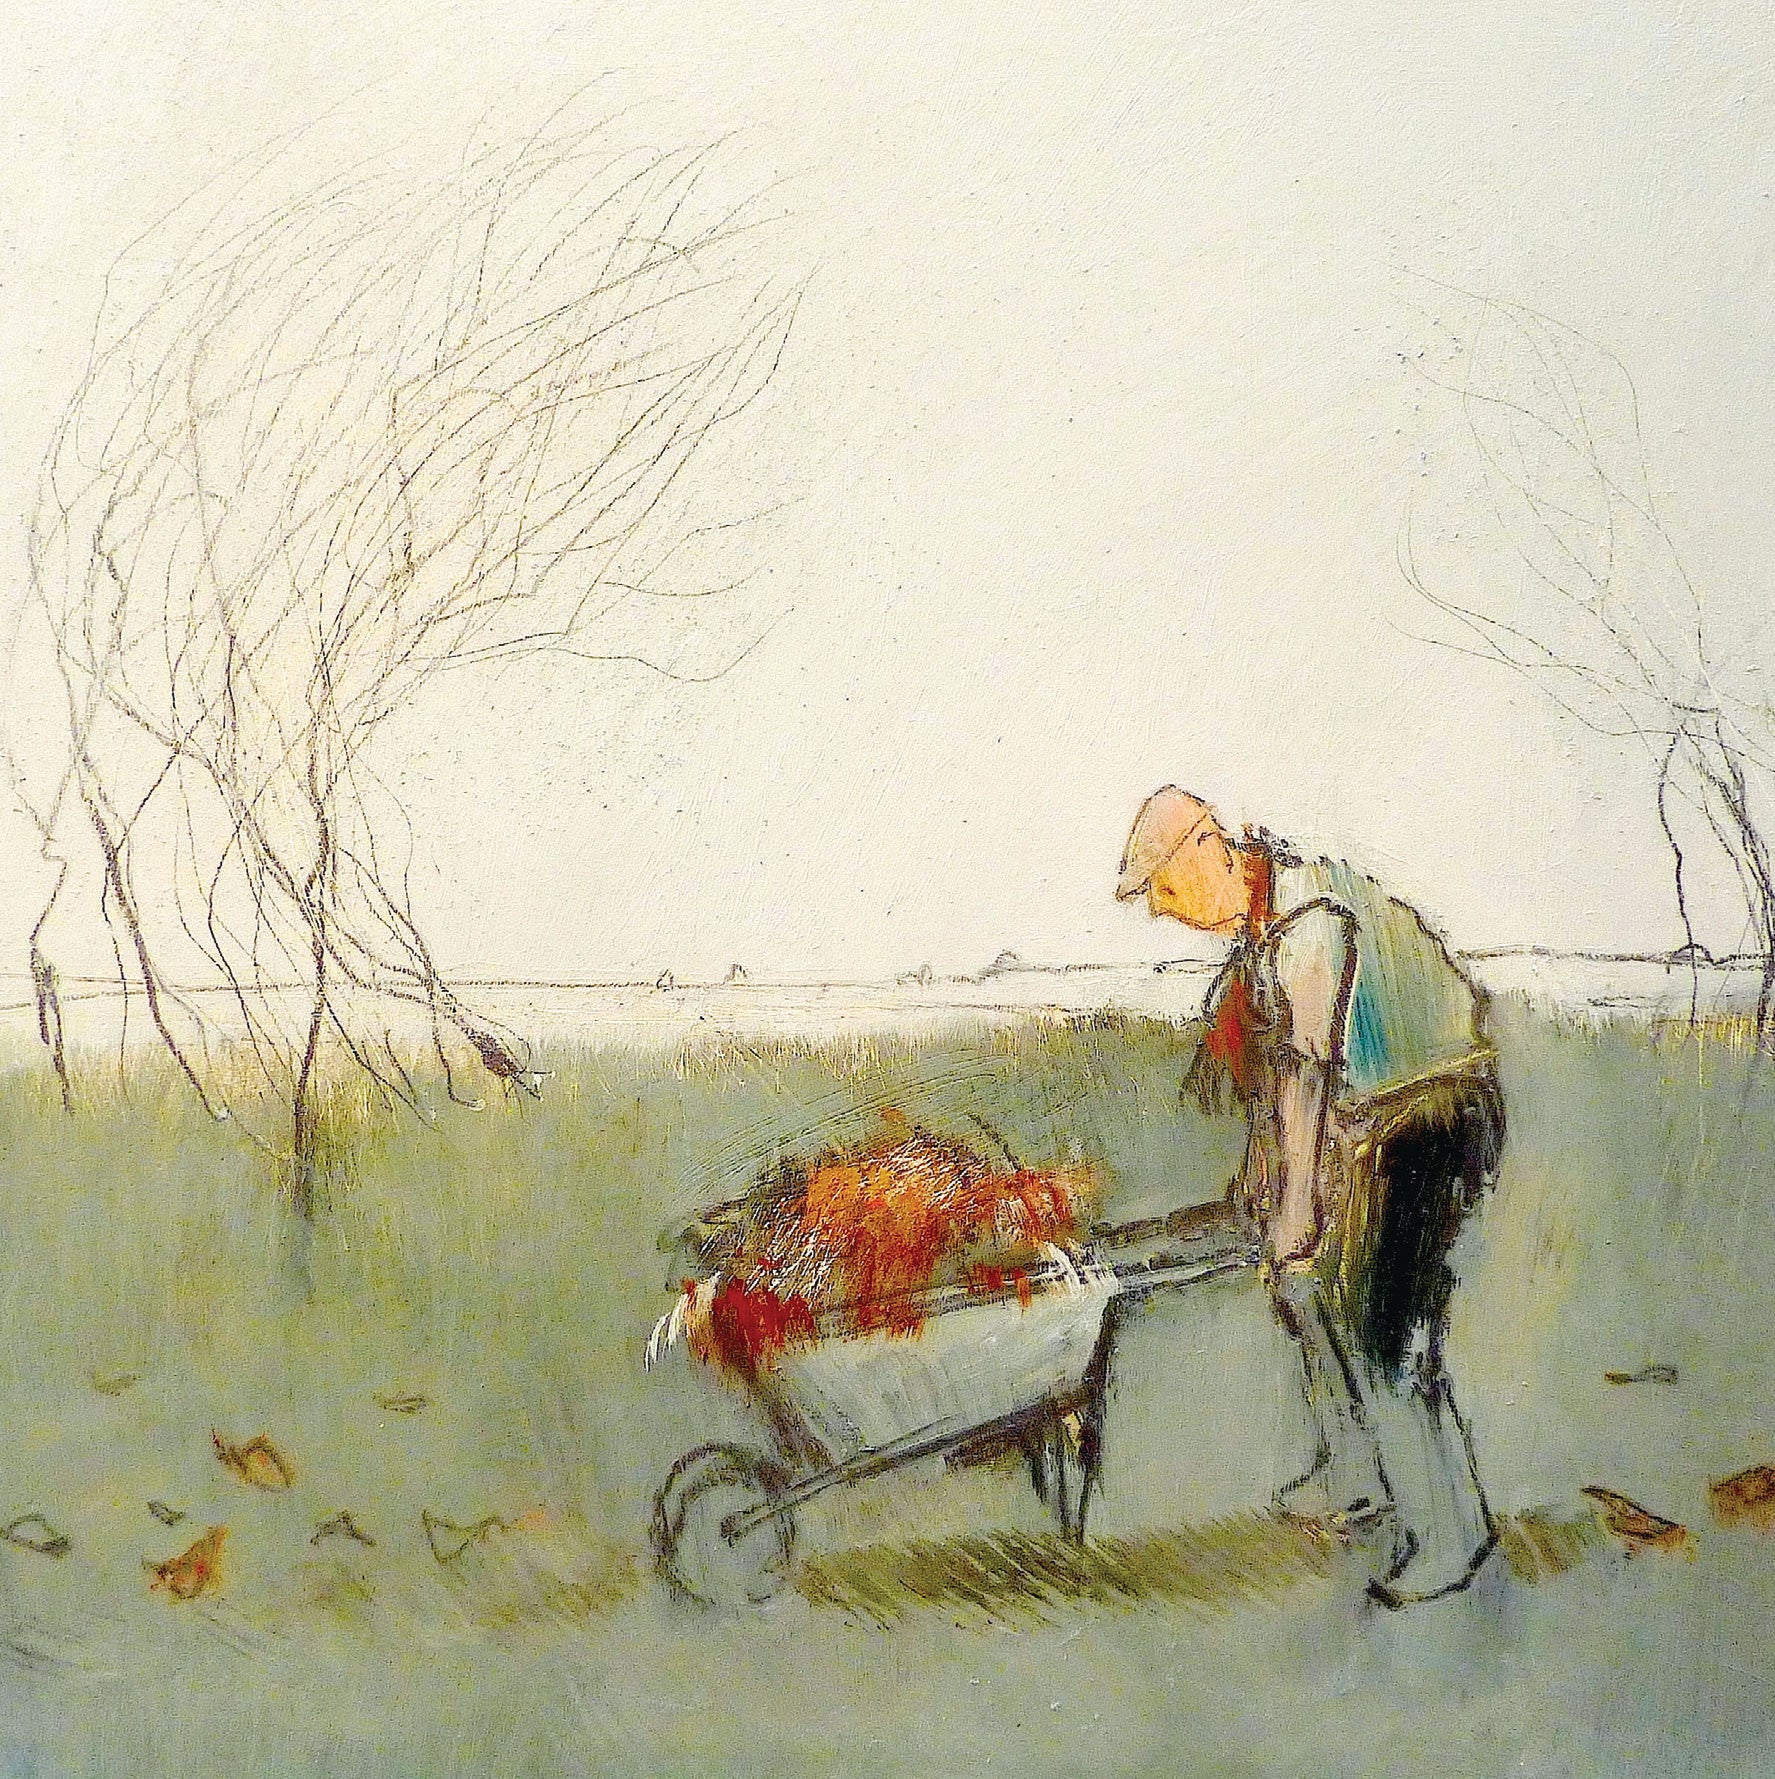 The Gardener by Tom Homewood, Fine Art Greeting Card, Oil on Panel, Man pushing wheel barrow with autumn leaves